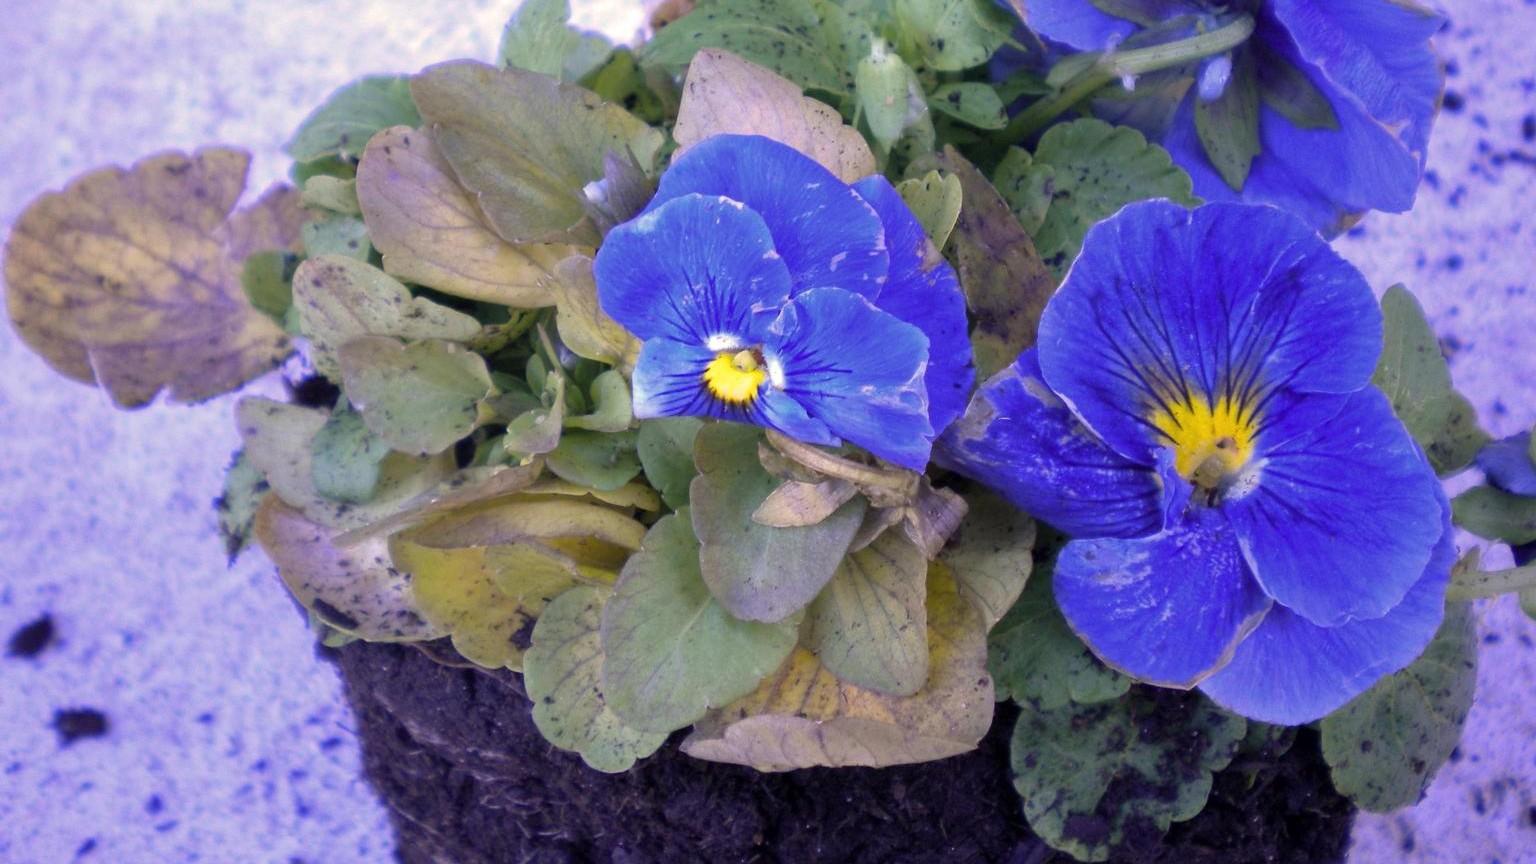 root rot symptoms on pansy